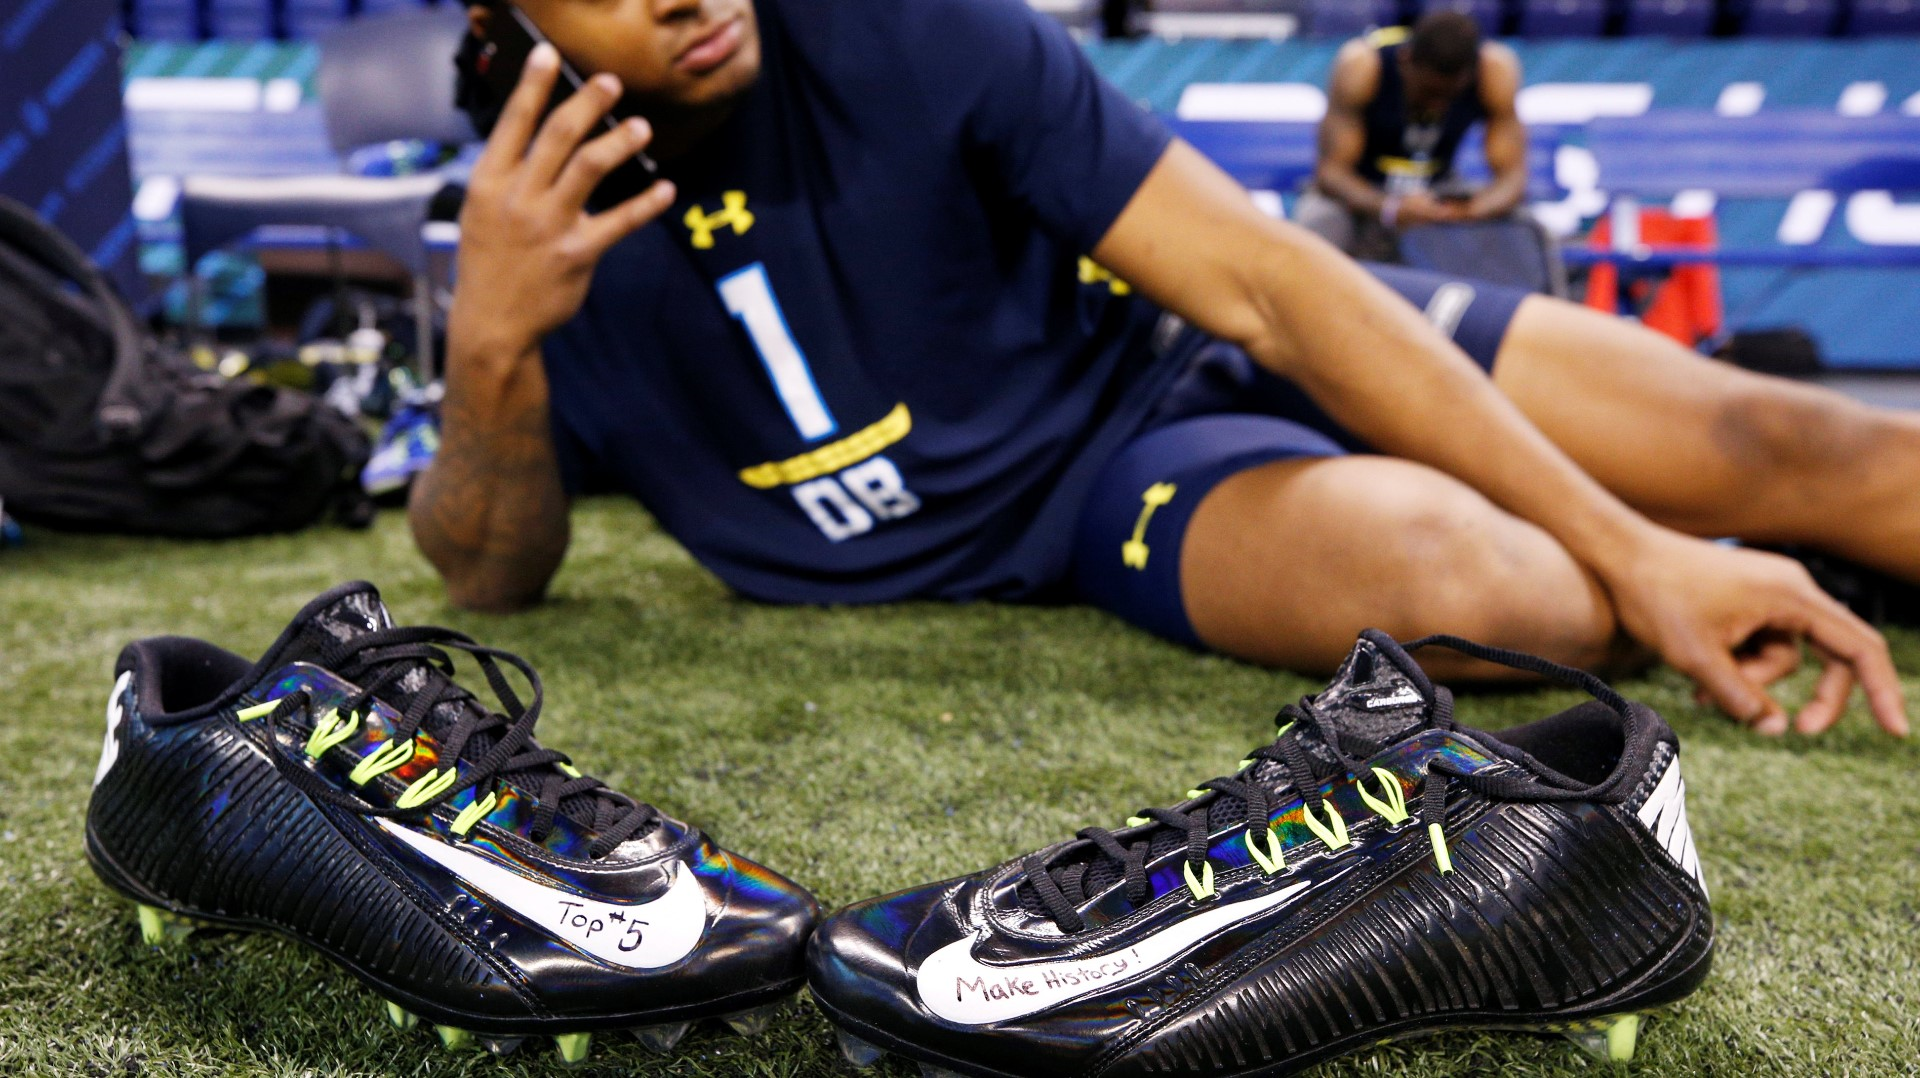 LIVE UPDATES: NFL Scouting Combine continues as players address media